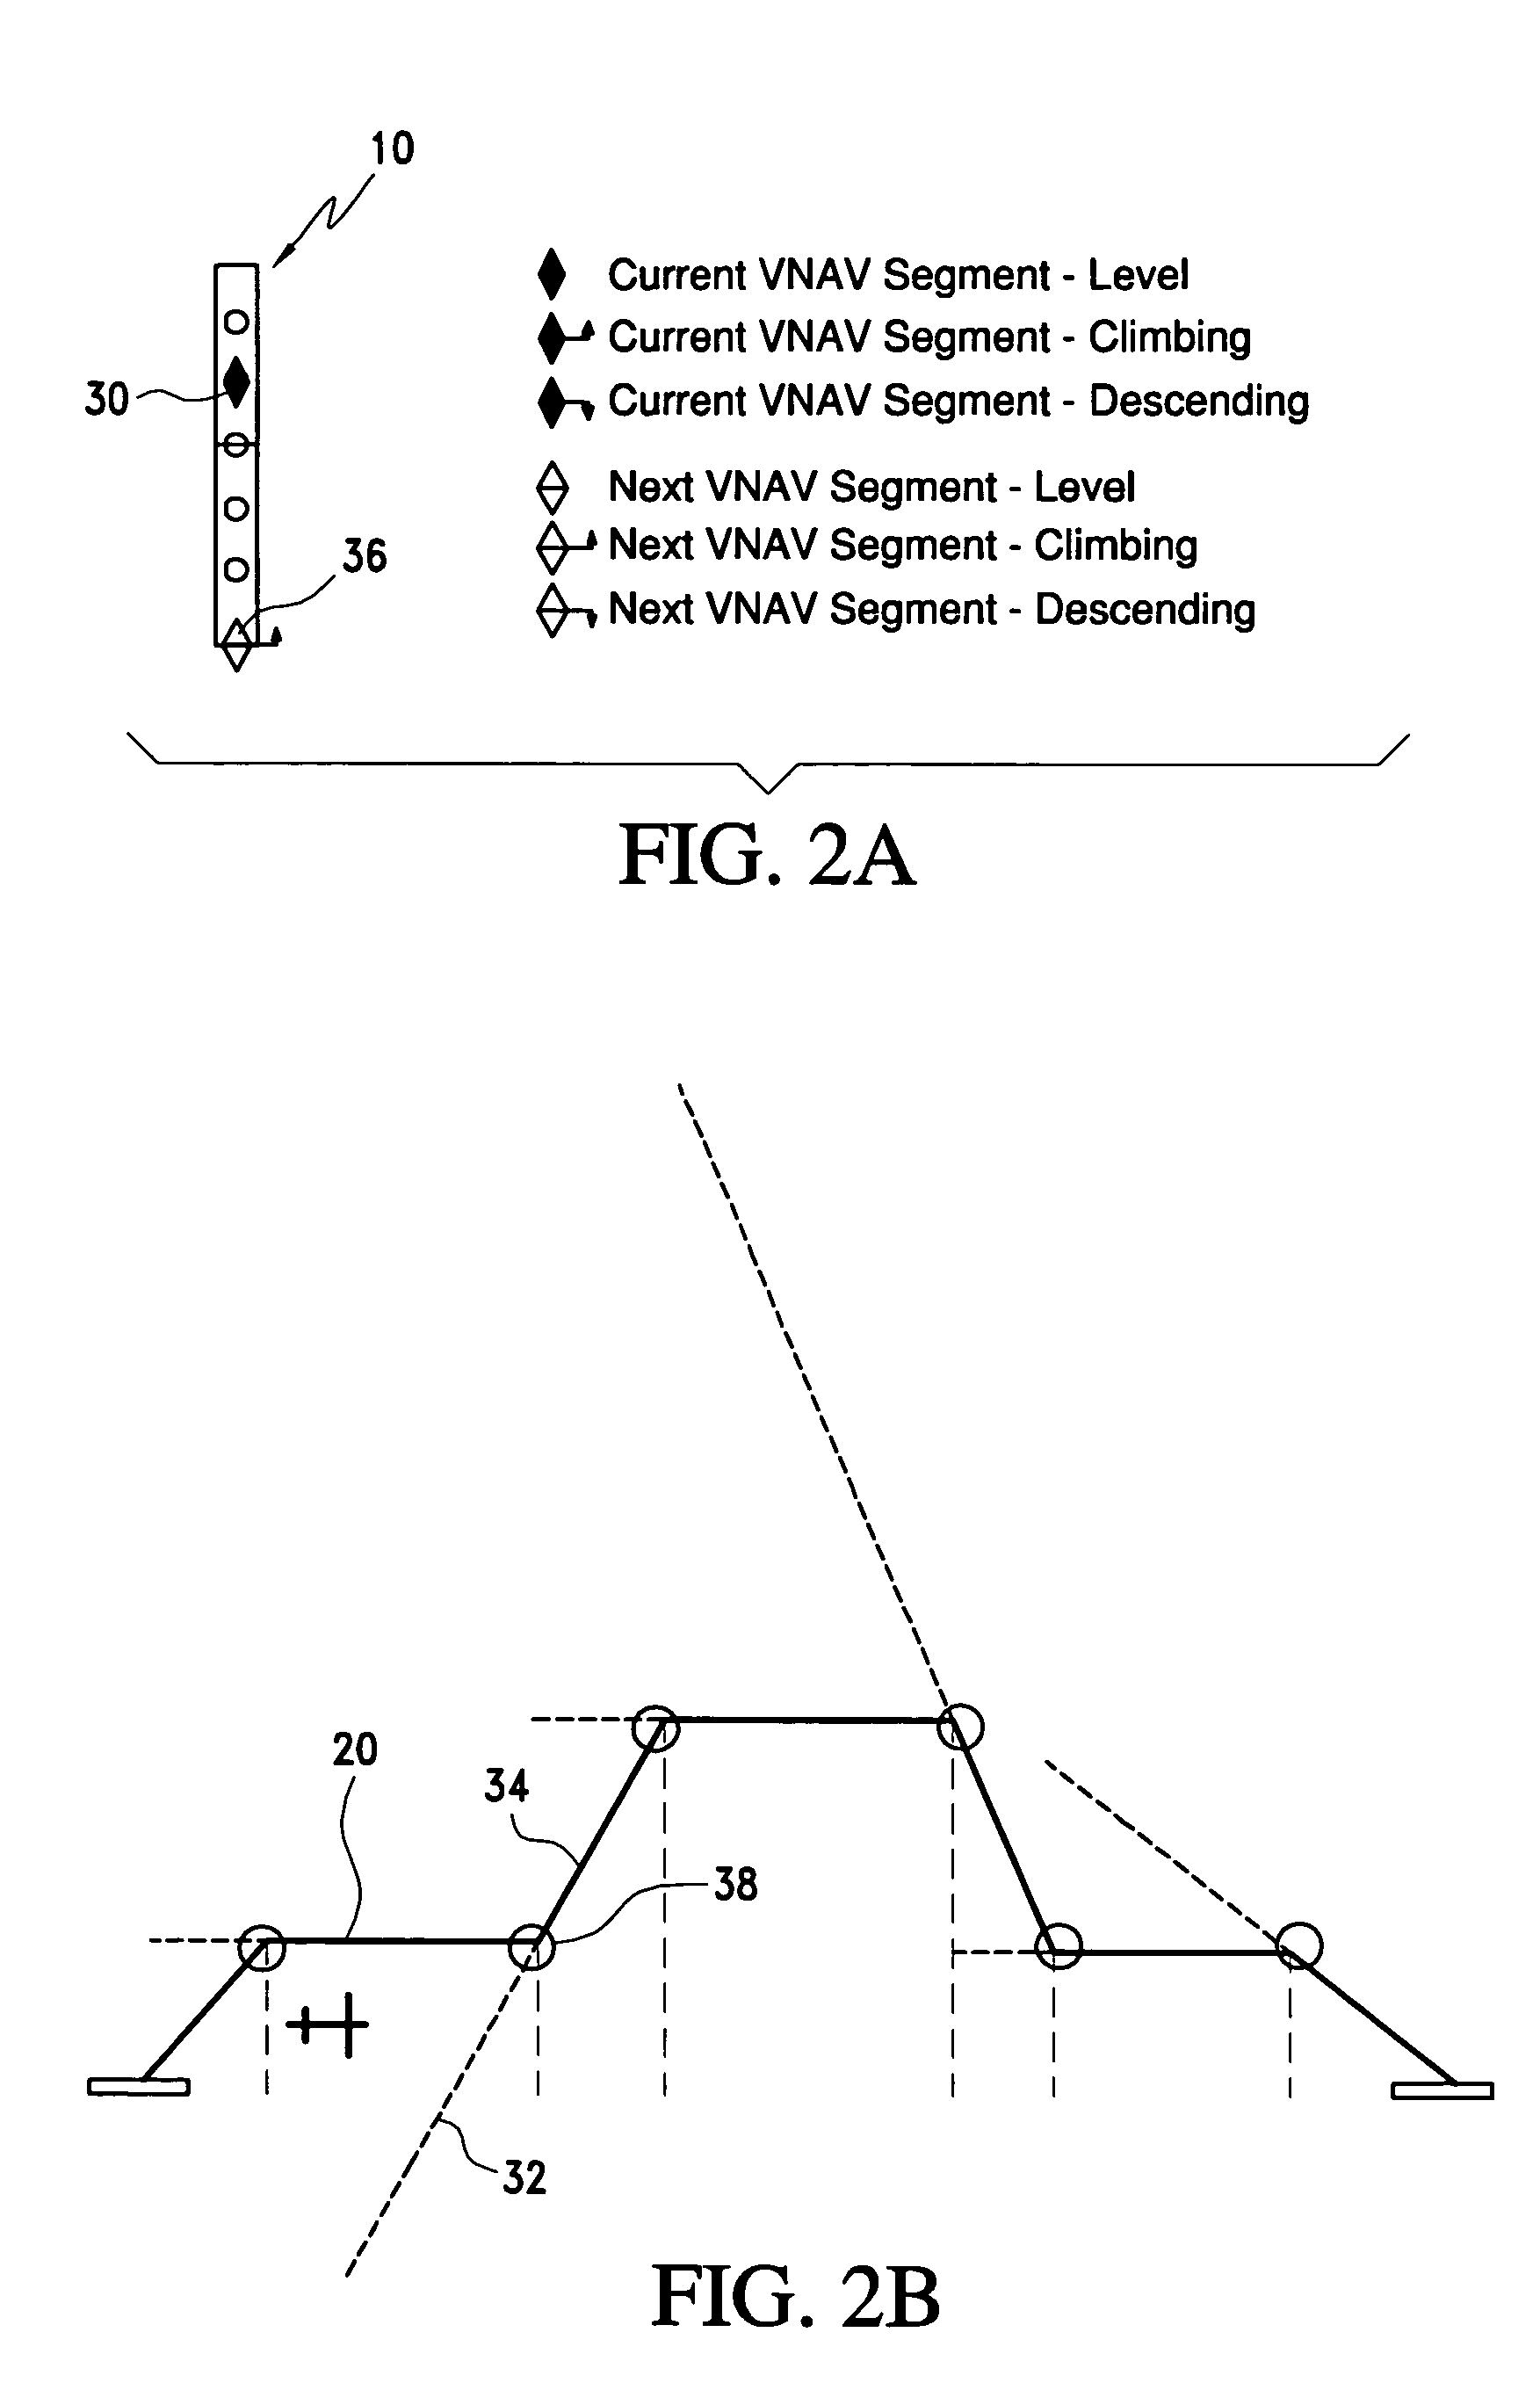 Vertical deviation indication and prediction system